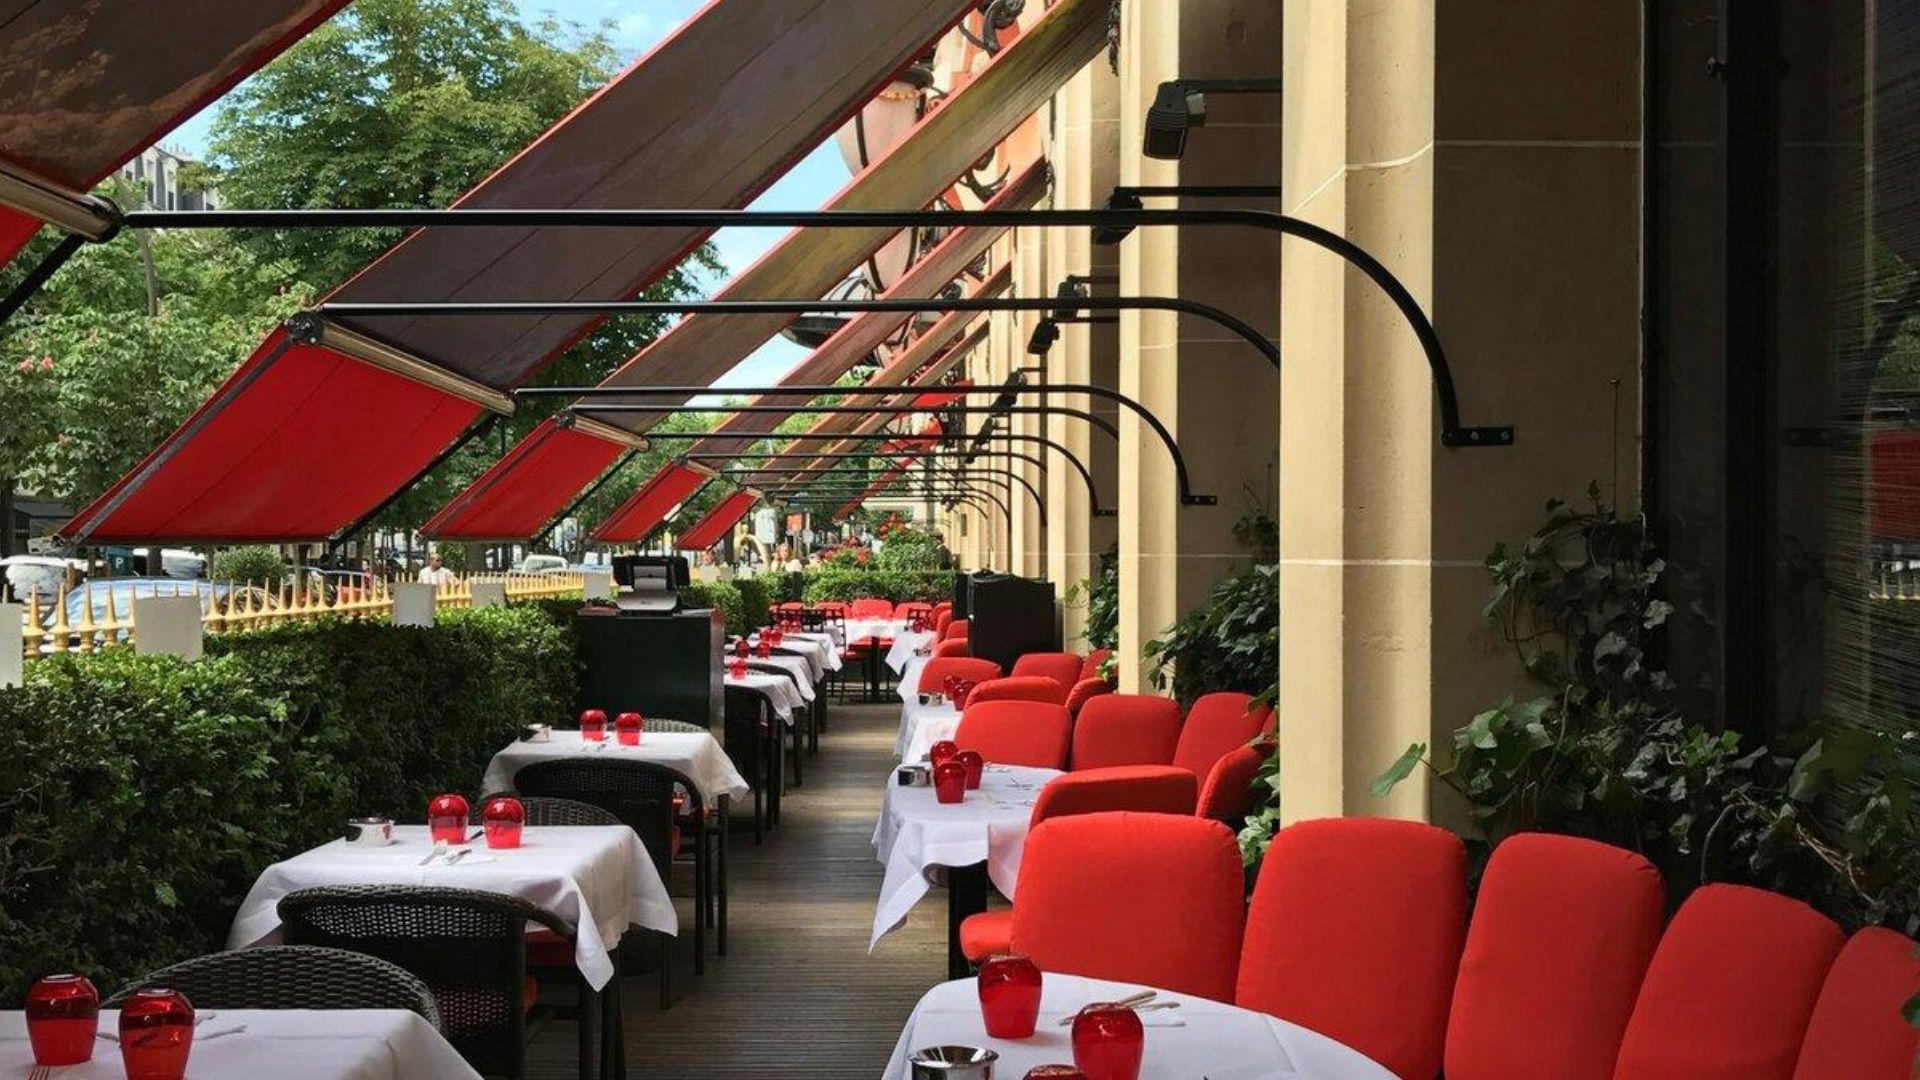 The Terrasse Montaigne at the Plaza Athénée is transformed for the summer